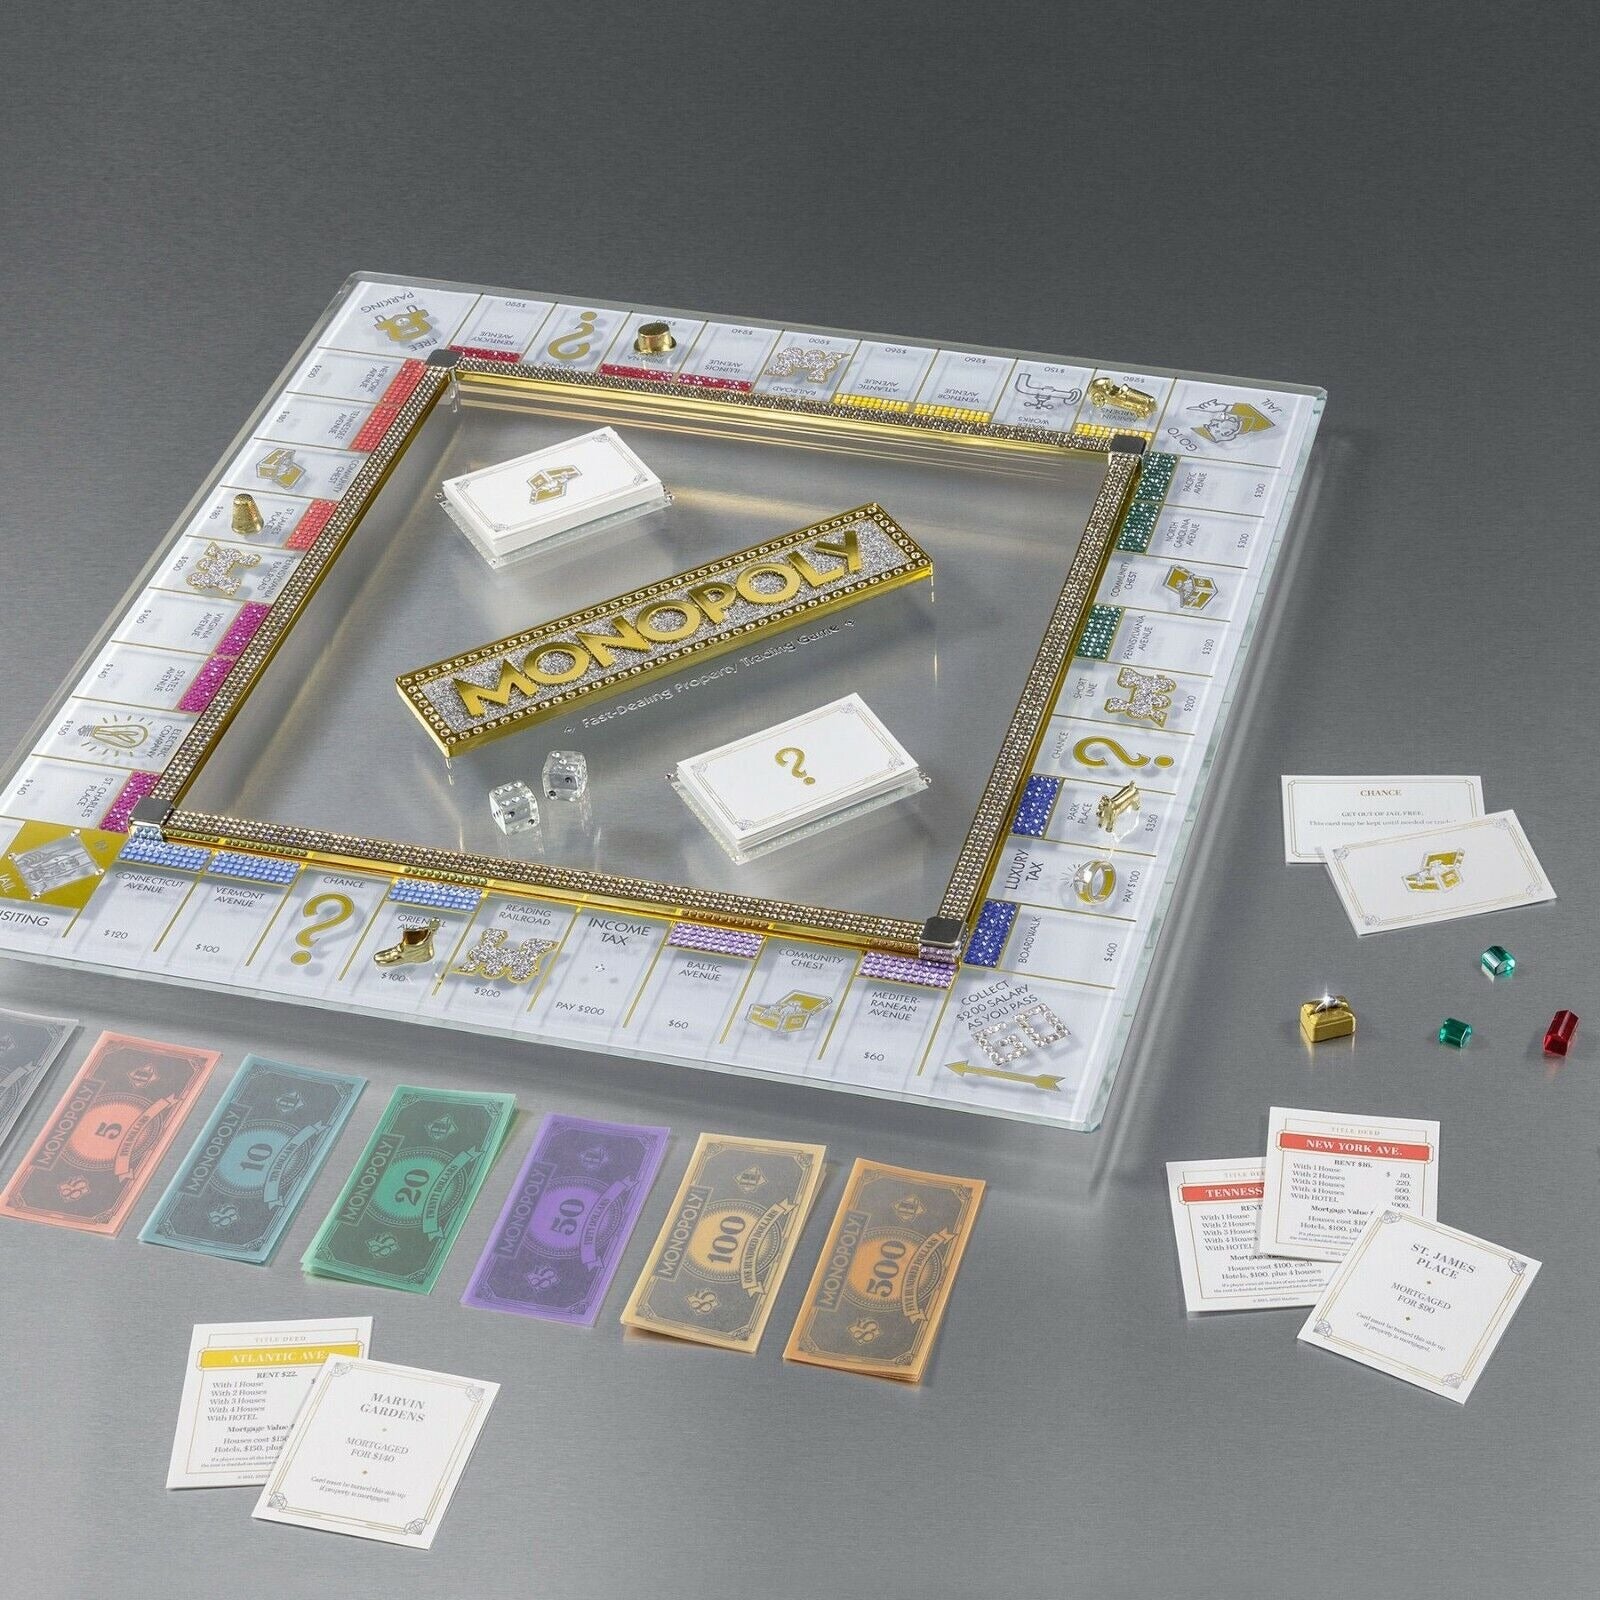 Hasbro Monopoly 85th Swarovski Anniversary Board Game - Brand New ONLY 500 MADE World Collection